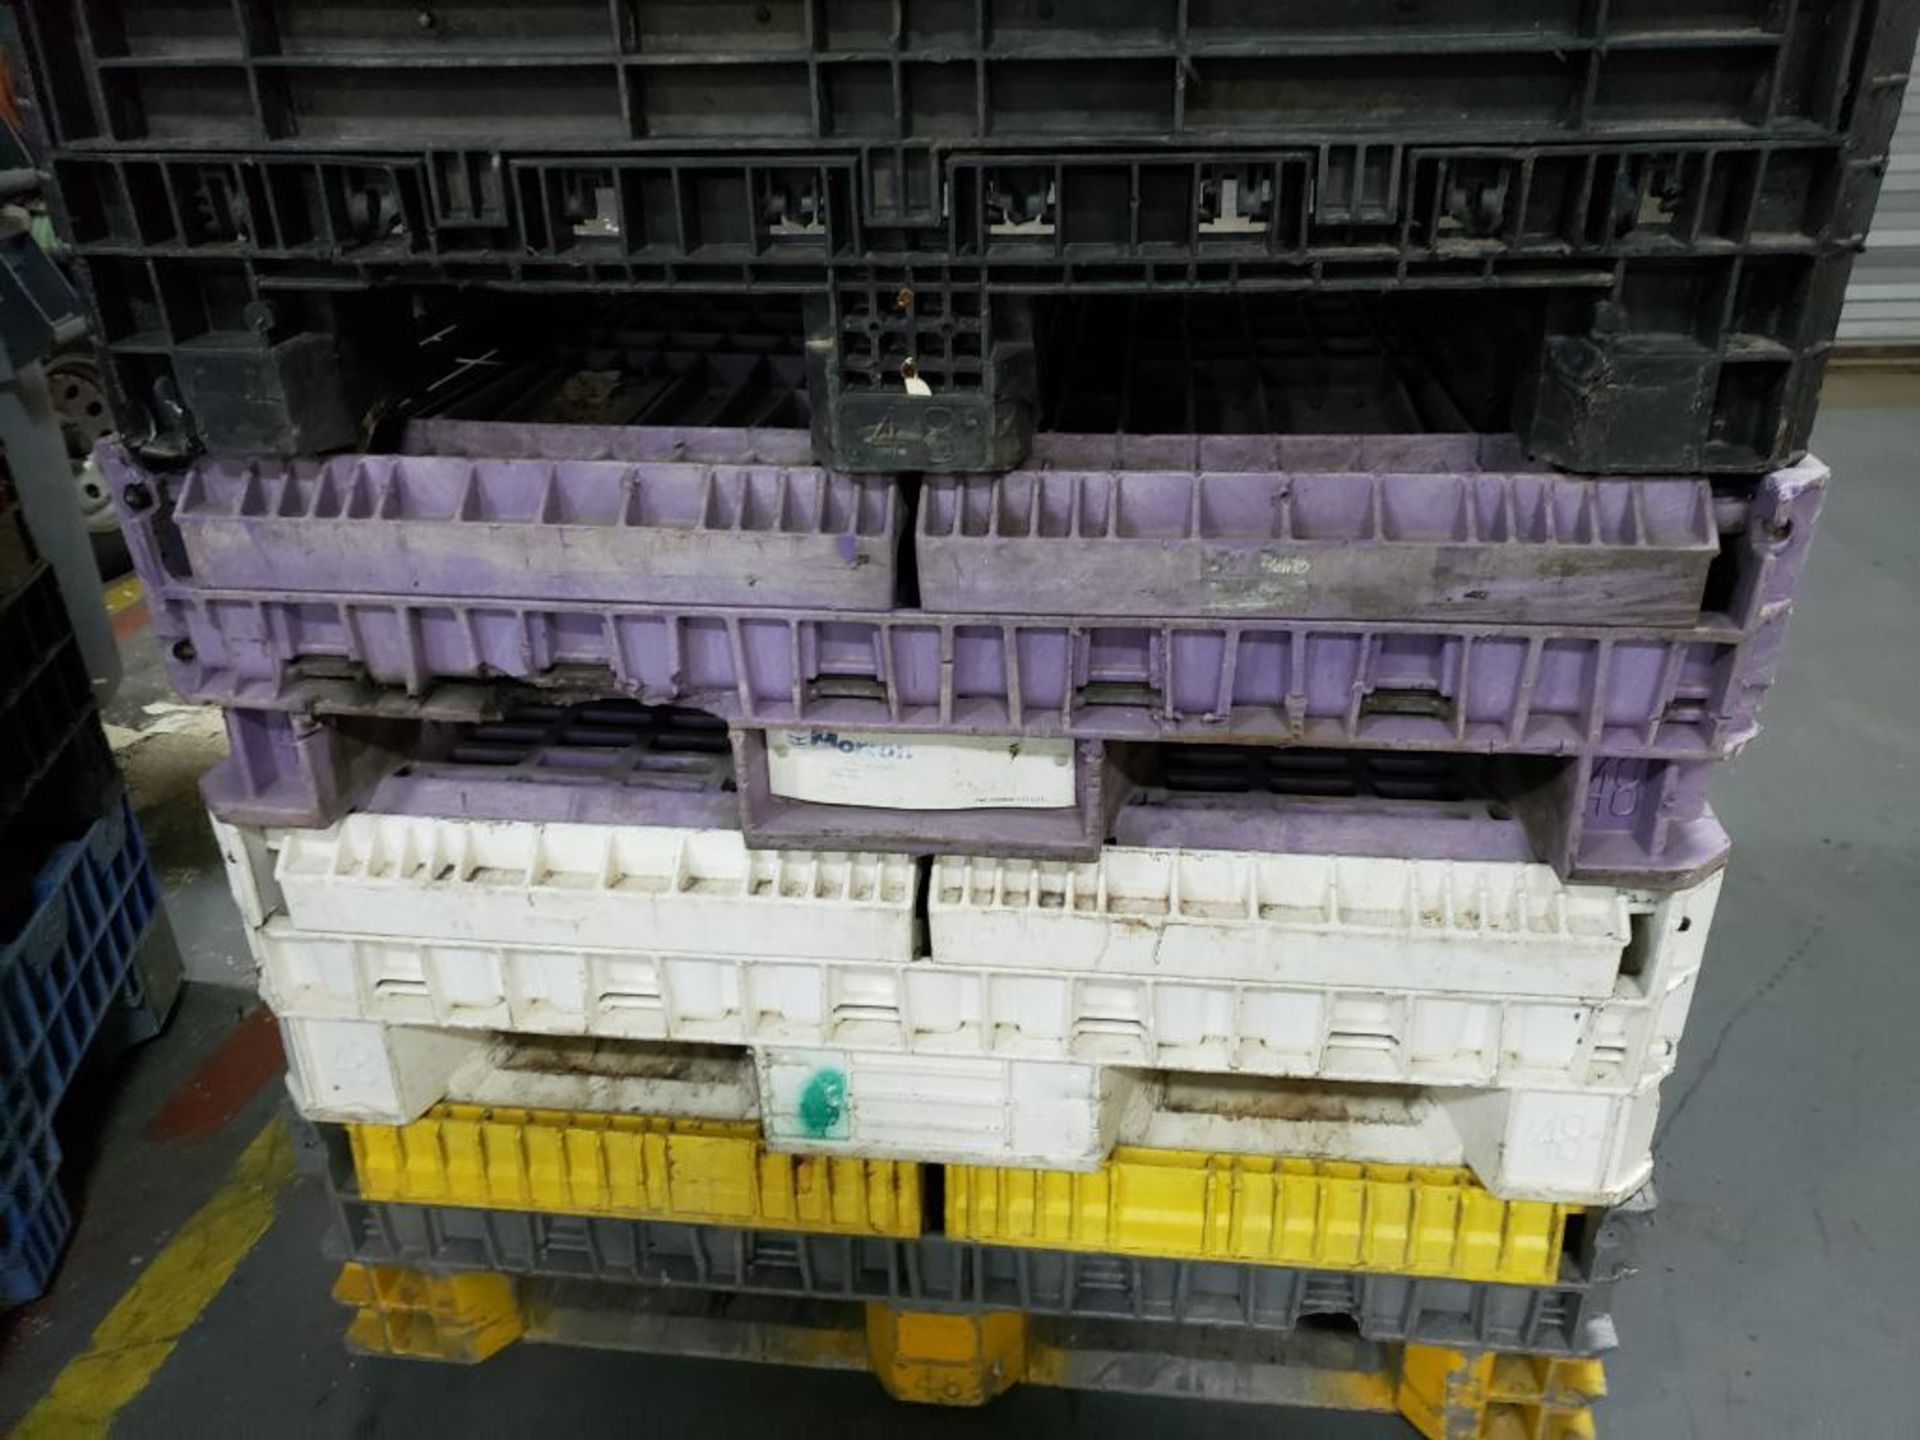 Qty 4 - Drop down gaylord containers. 48in x 46in. Heights may vary slightly. - Image 3 of 5